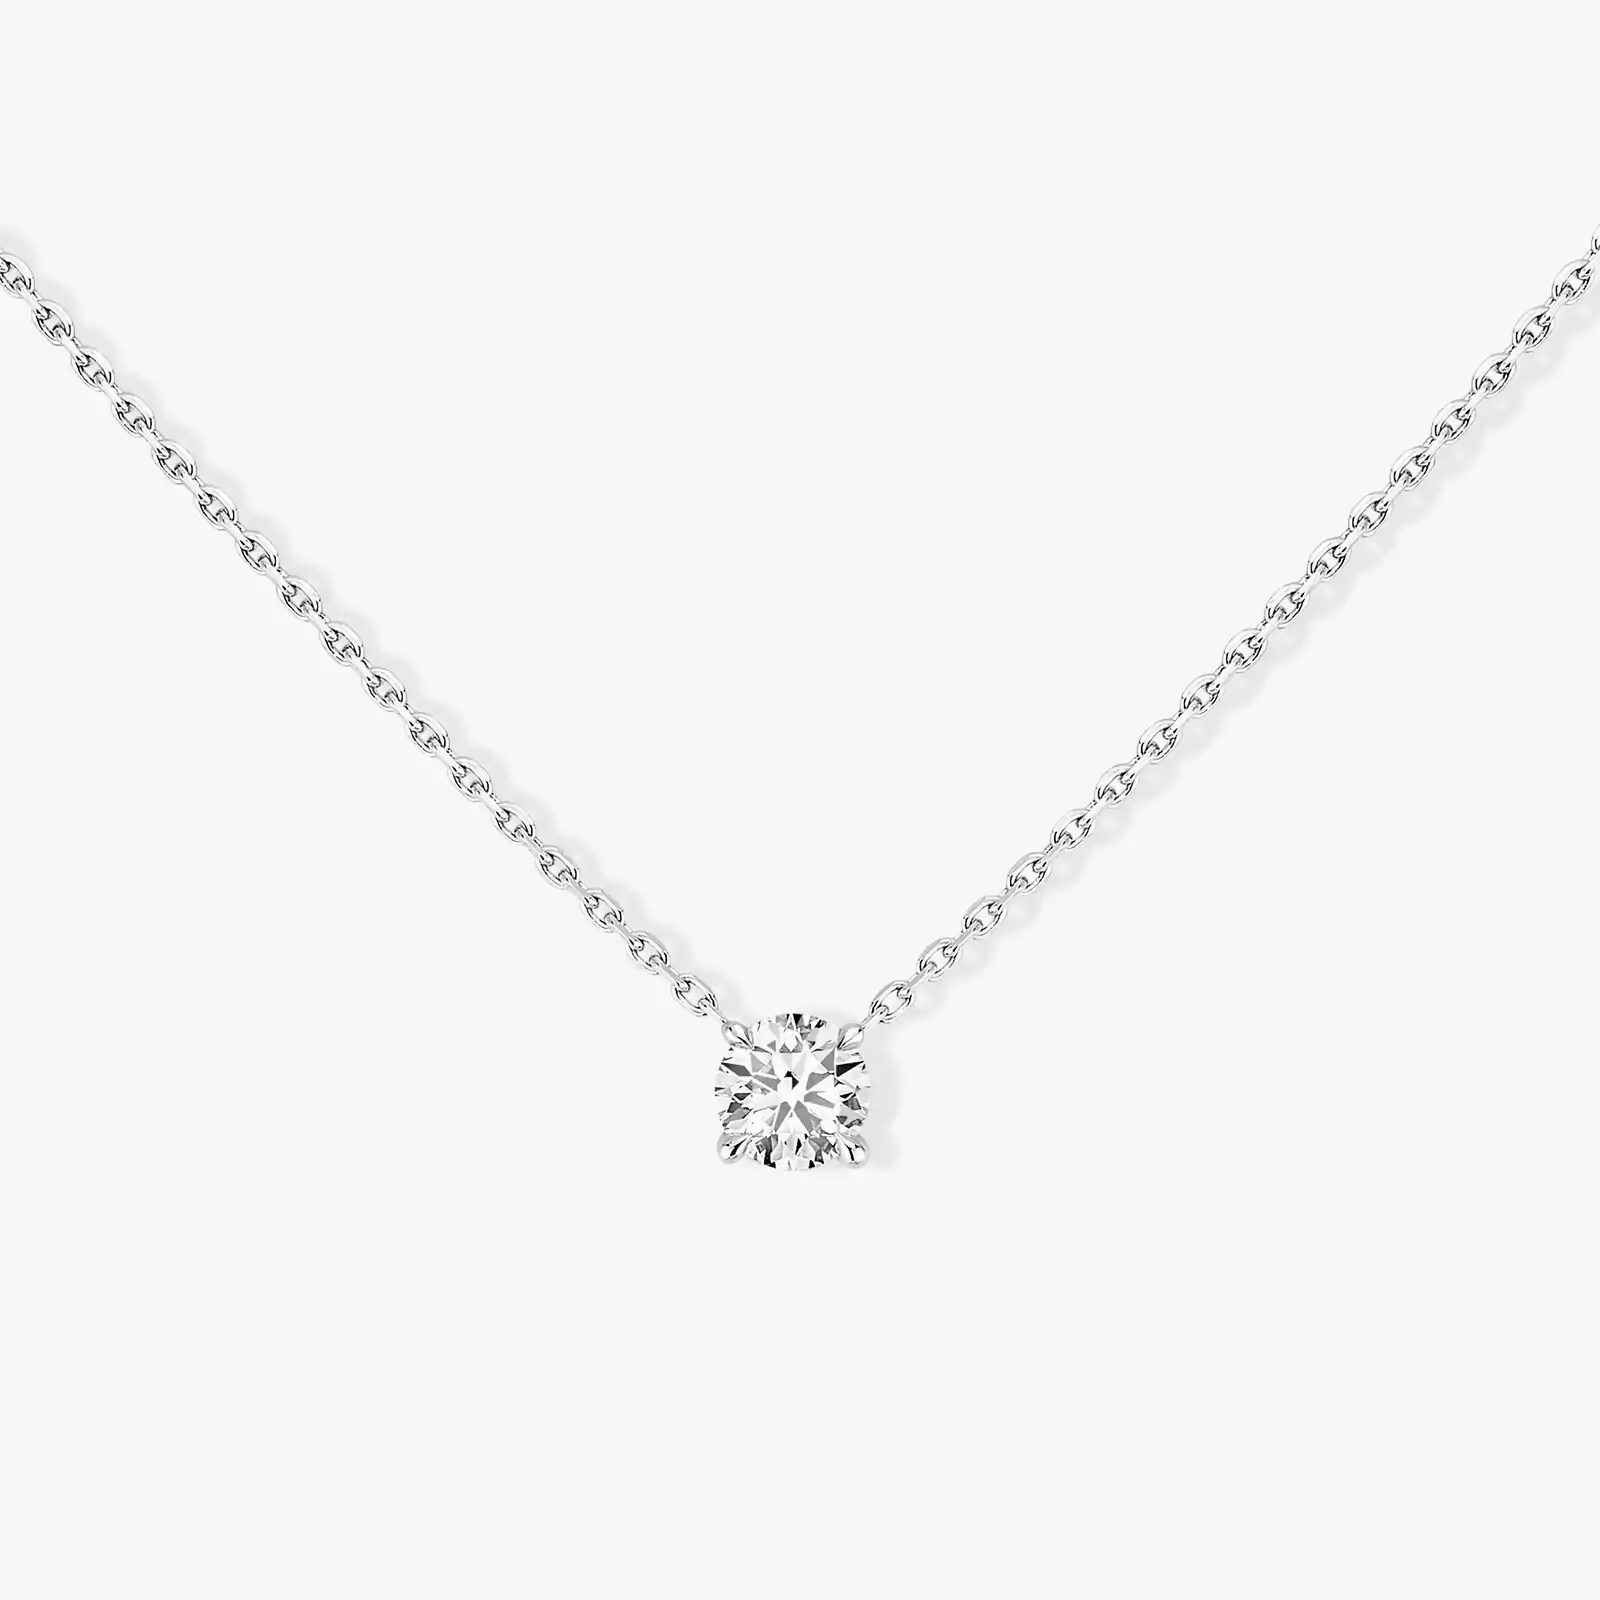 Brilliant-Cut Solitaire 0.25ct G/VS White Gold For Her Diamond Necklace 08647-WG